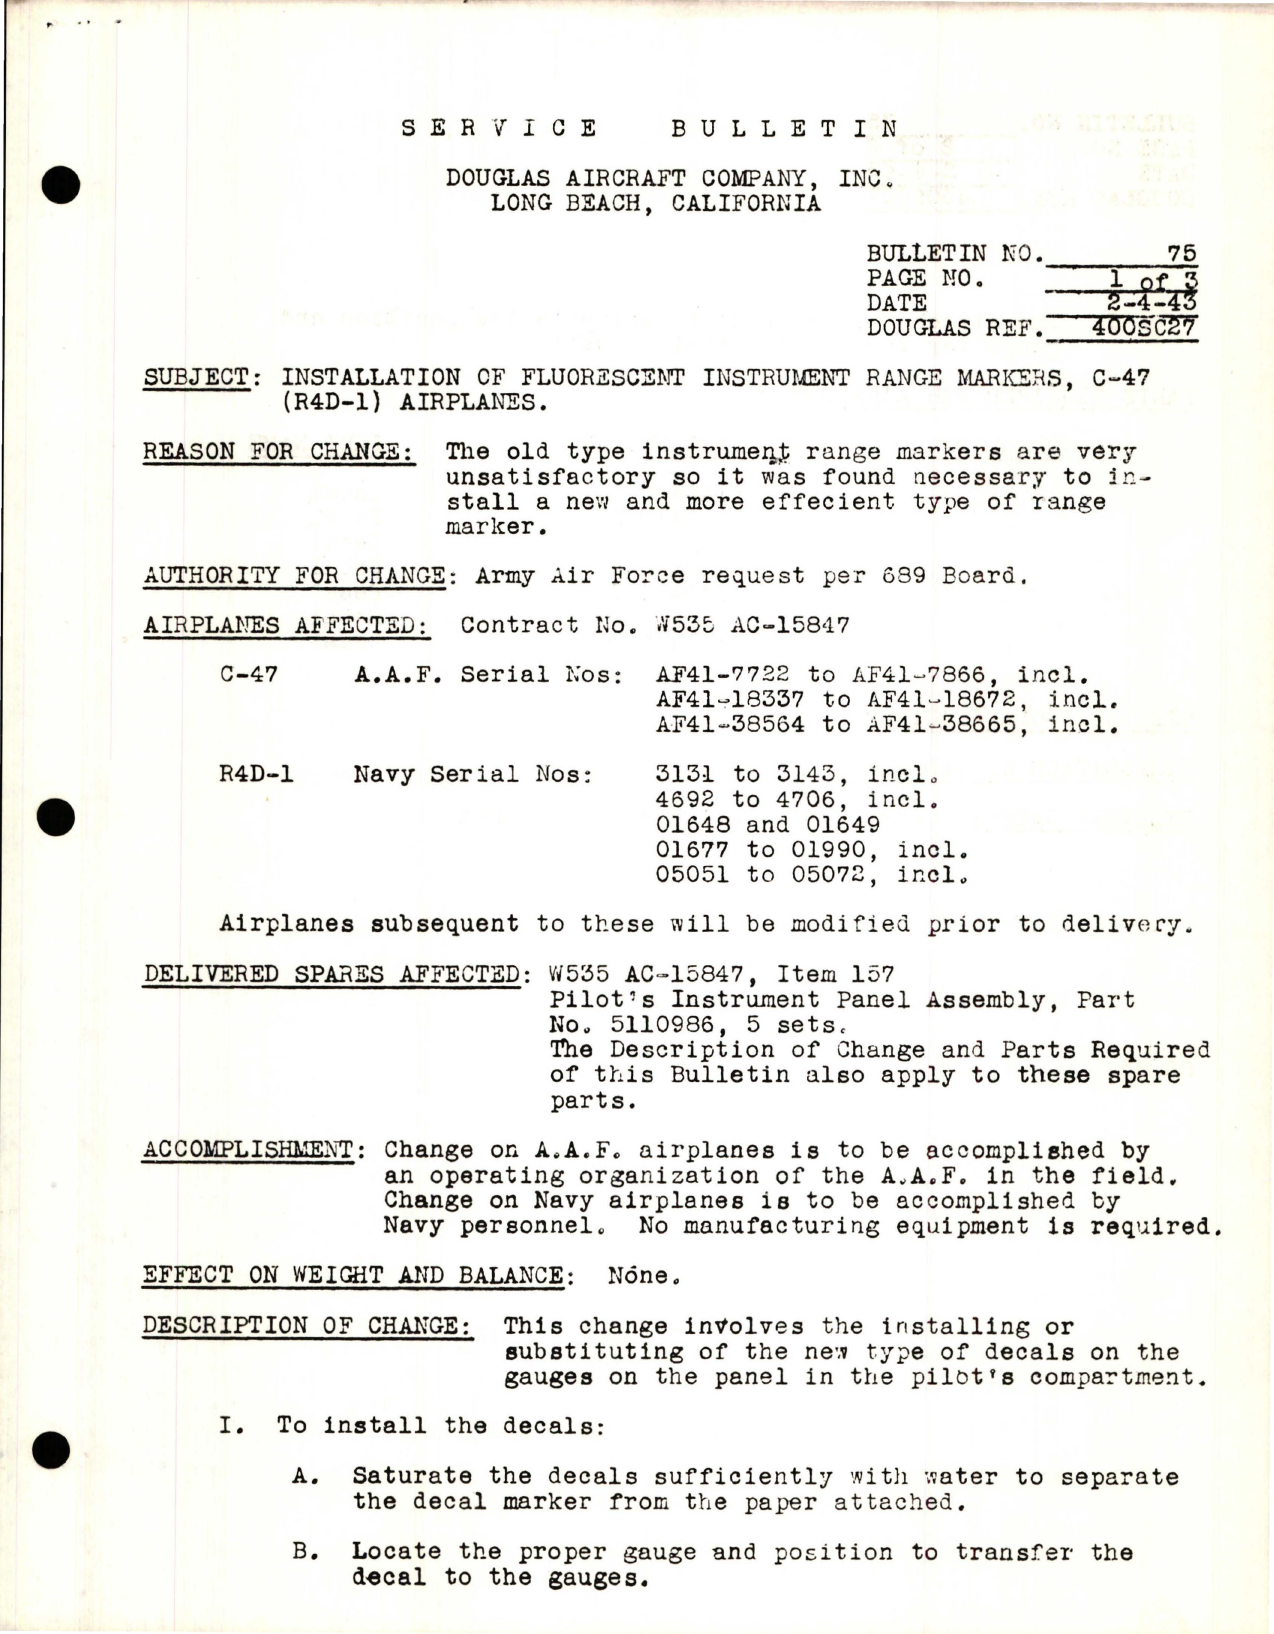 Sample page 1 from AirCorps Library document: Installation of Fluorescent Instrument Range Markers